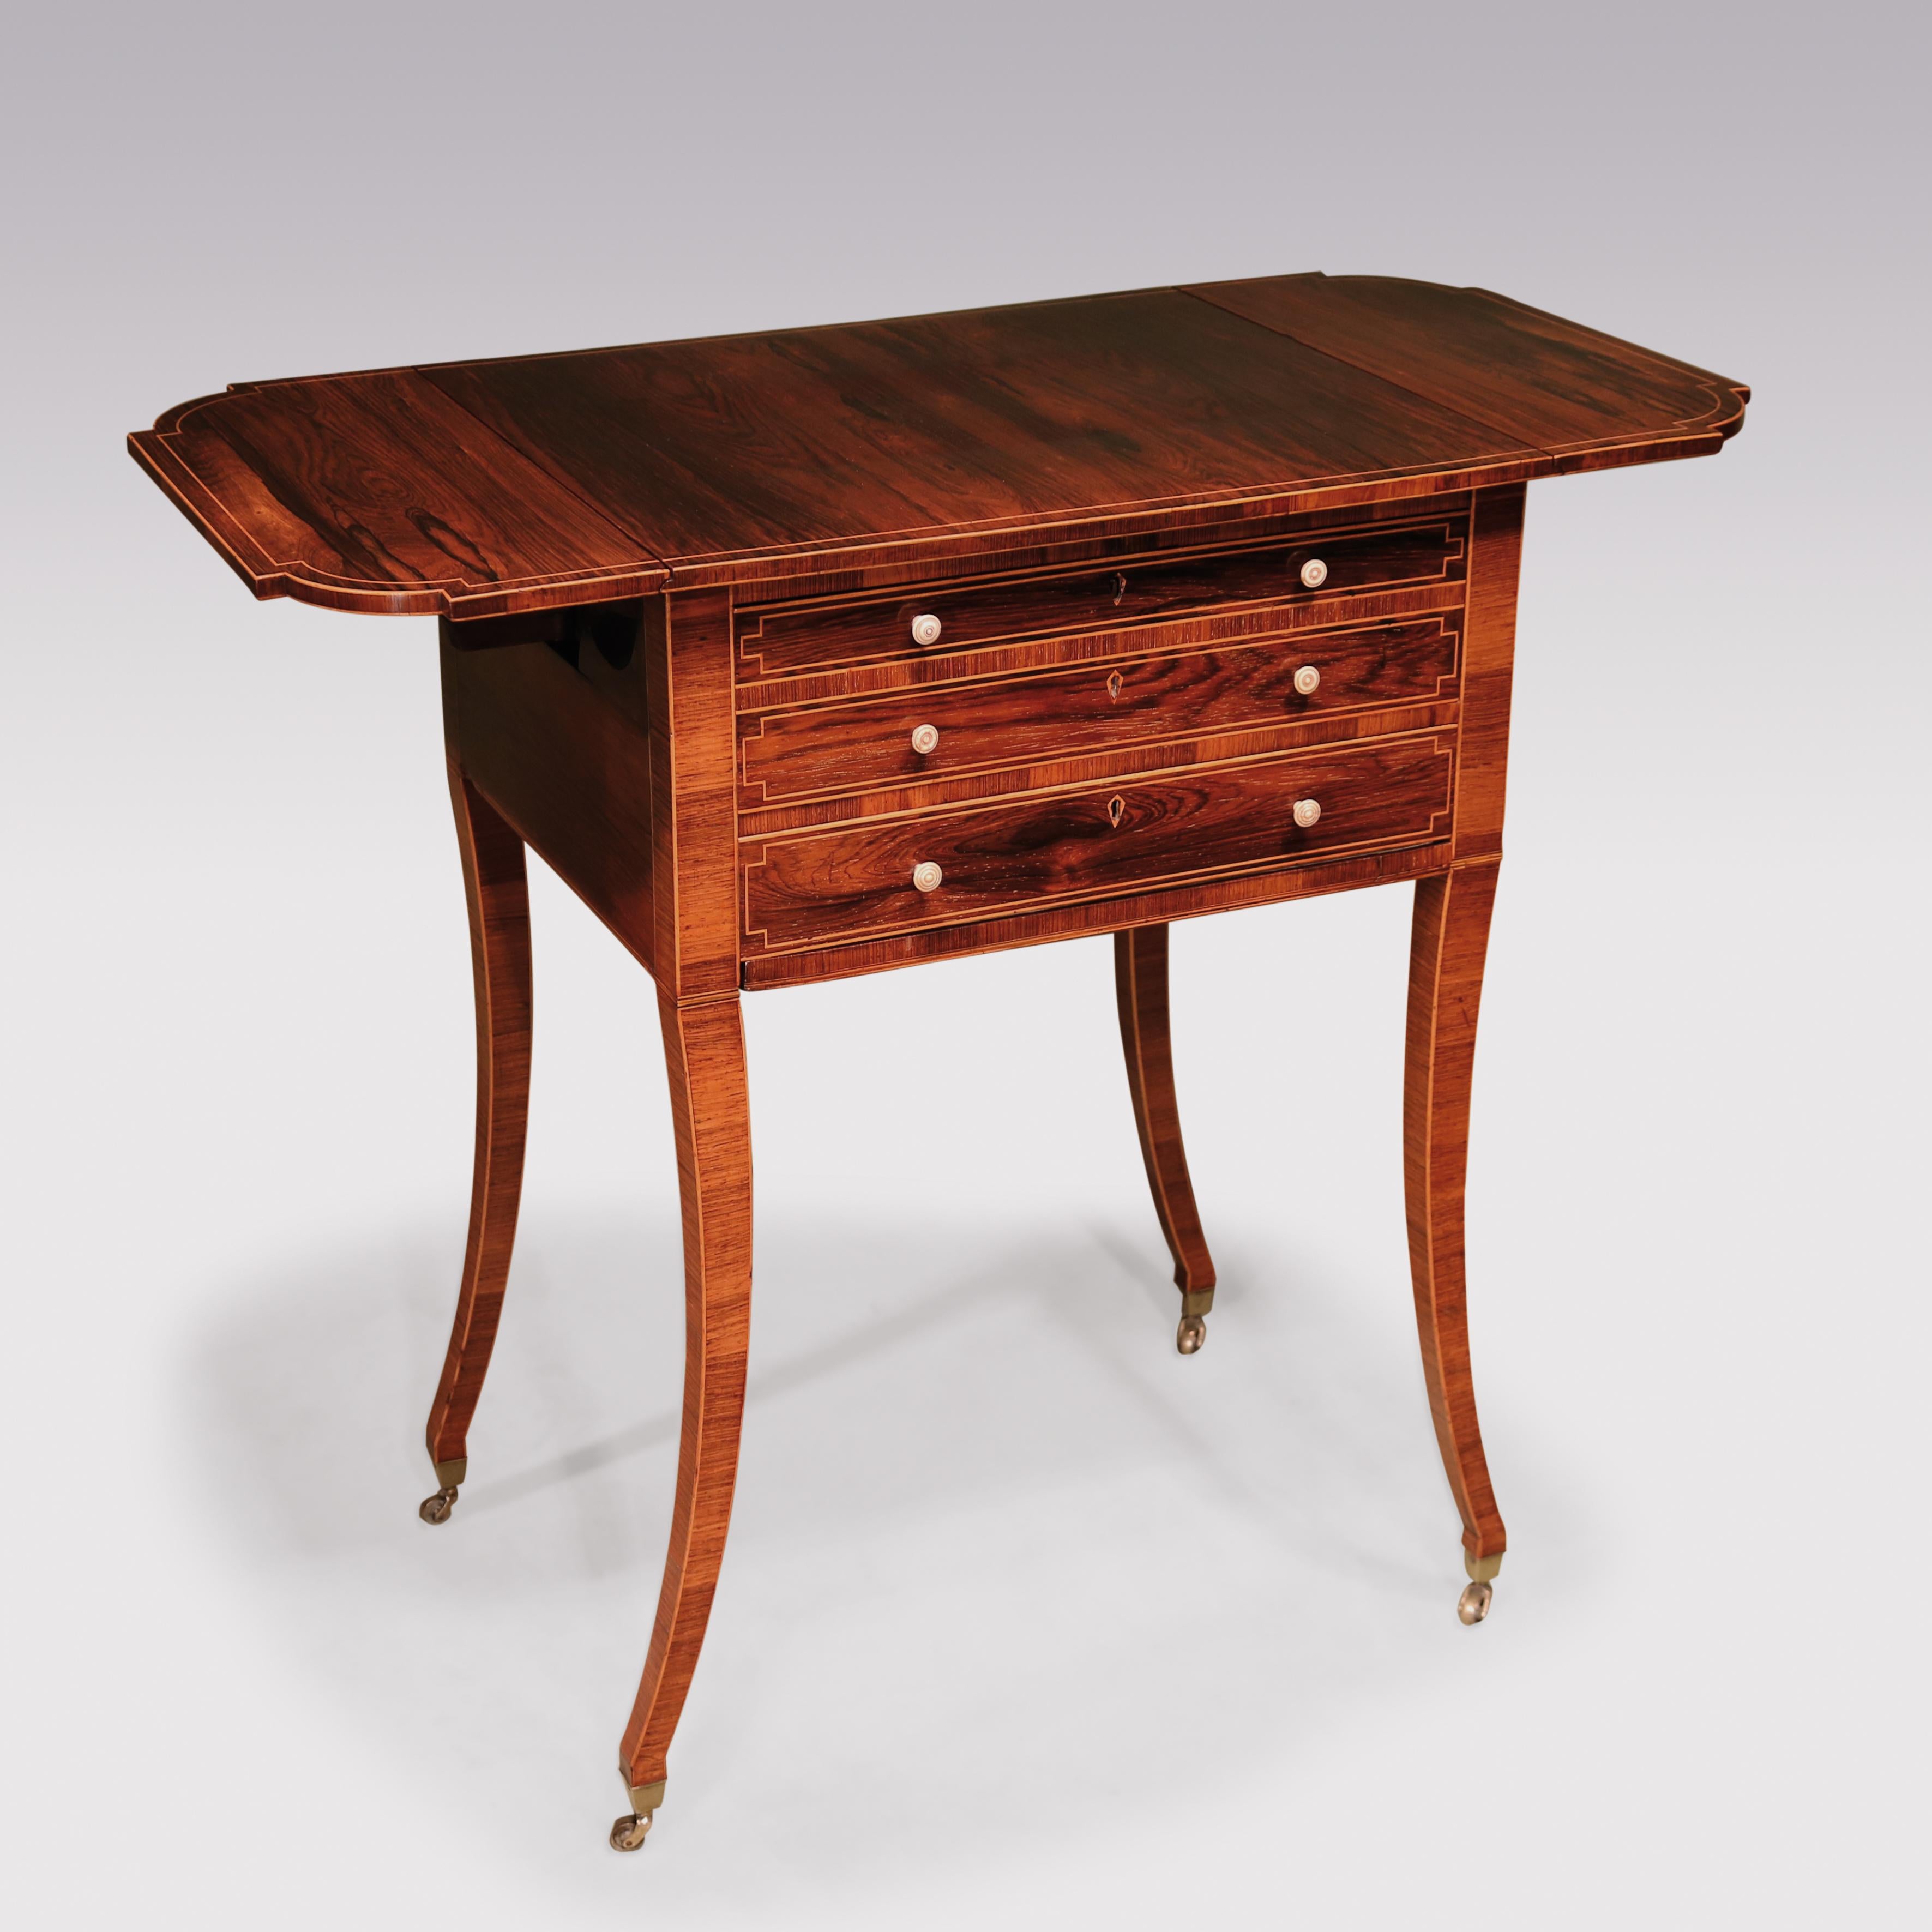 A fine quality early 19th century Regency period rosewood occasional table boxwood strung throughout, having rectangular top with breakfront bowfront flaps above 2 frieze drawers and workbox, supported on unusual cross-grain veneered sabre legs